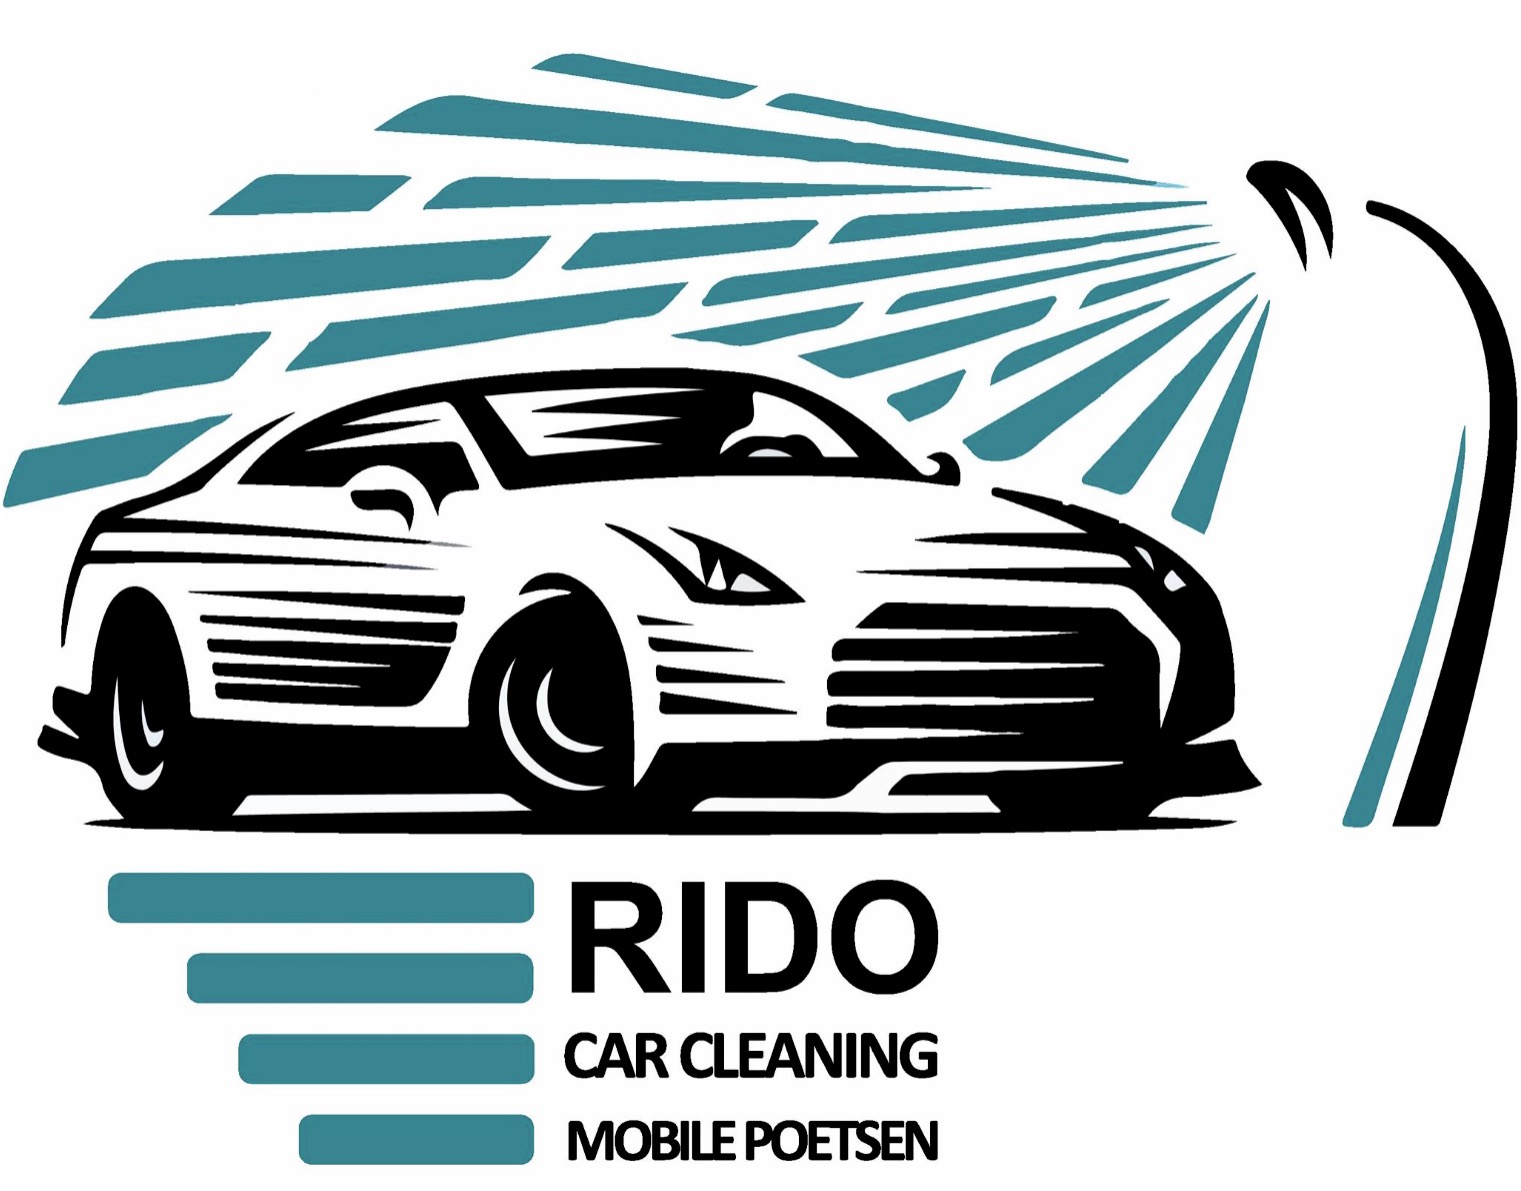 Rido car cleaning